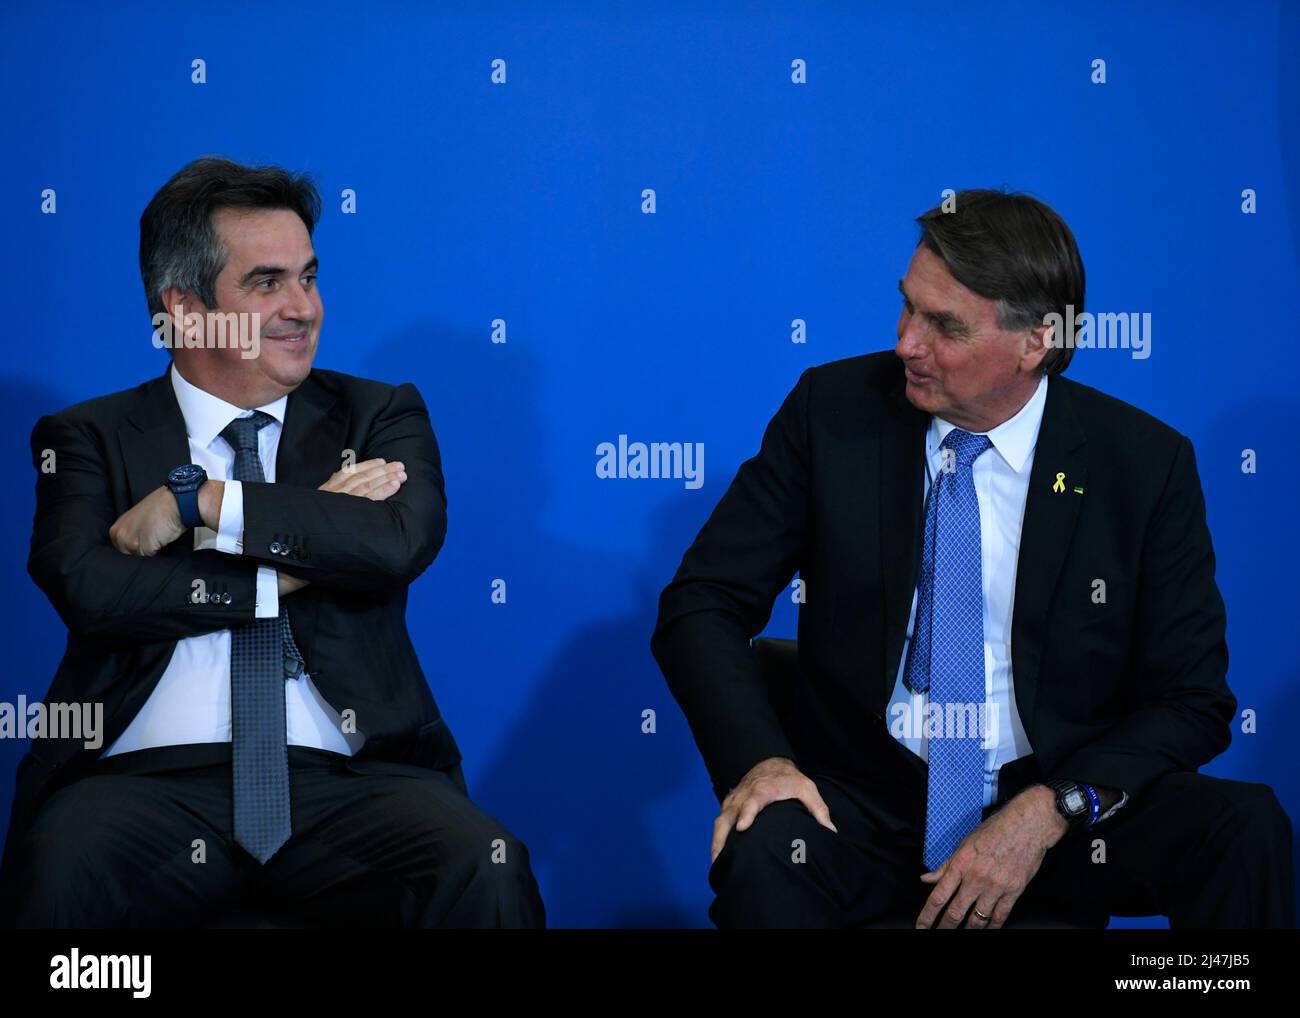 Brasilia, Brazil. 12th Apr, 2022. DF - Brasilia - 04/12/2022 - BRASILIA, CEREMONY FOR THE INSTALLATION OF INTERNET IN SCHOOLS - The President of the Republic, Jair Bolsonaro, accompanied by the Minister of Civil Affairs, Ciro Nogueira, during the announcement of the installation of 12,000 new Wi-Fi points Fi Brasil in public schools this Tuesday, April 11th. Photo: Mateus Bonomi/AGIF Credit: AGIF/Alamy Live News Stock Photo